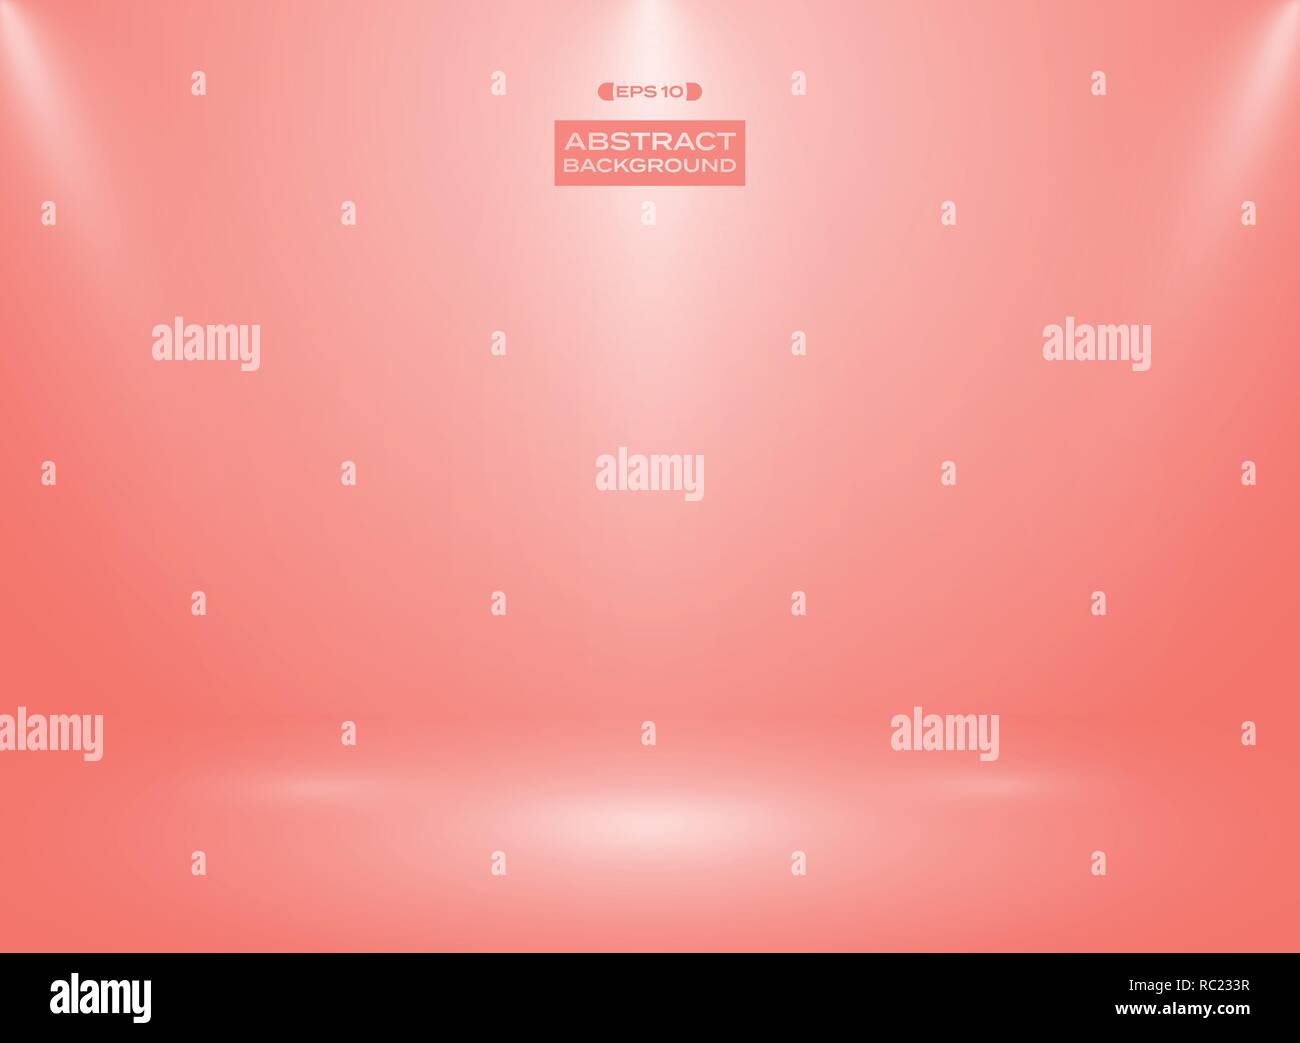 Abstract of living coral color 2019 in studio room background with spotlights. Illustration vector eps10 Stock Vector